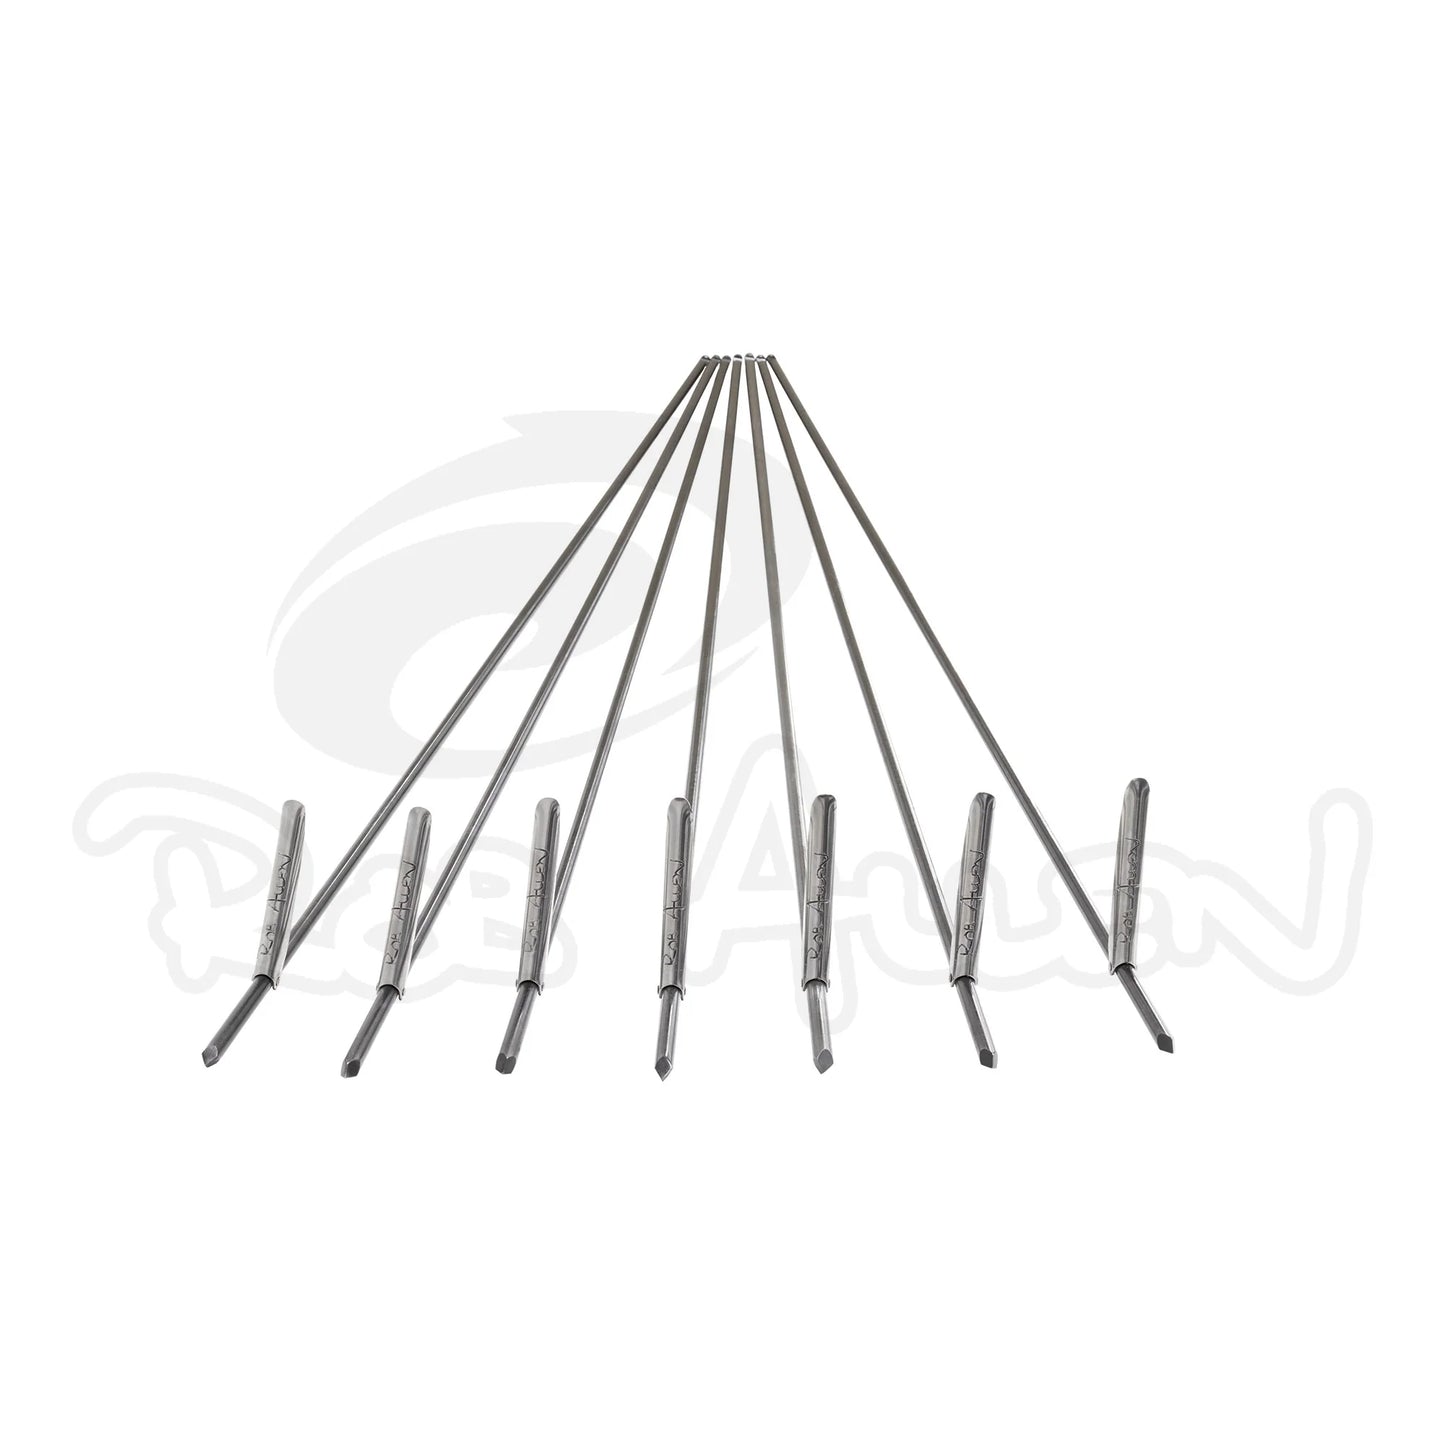 ROB ALLEN SPEAR 7.5MM DOUBLE NOTCHED